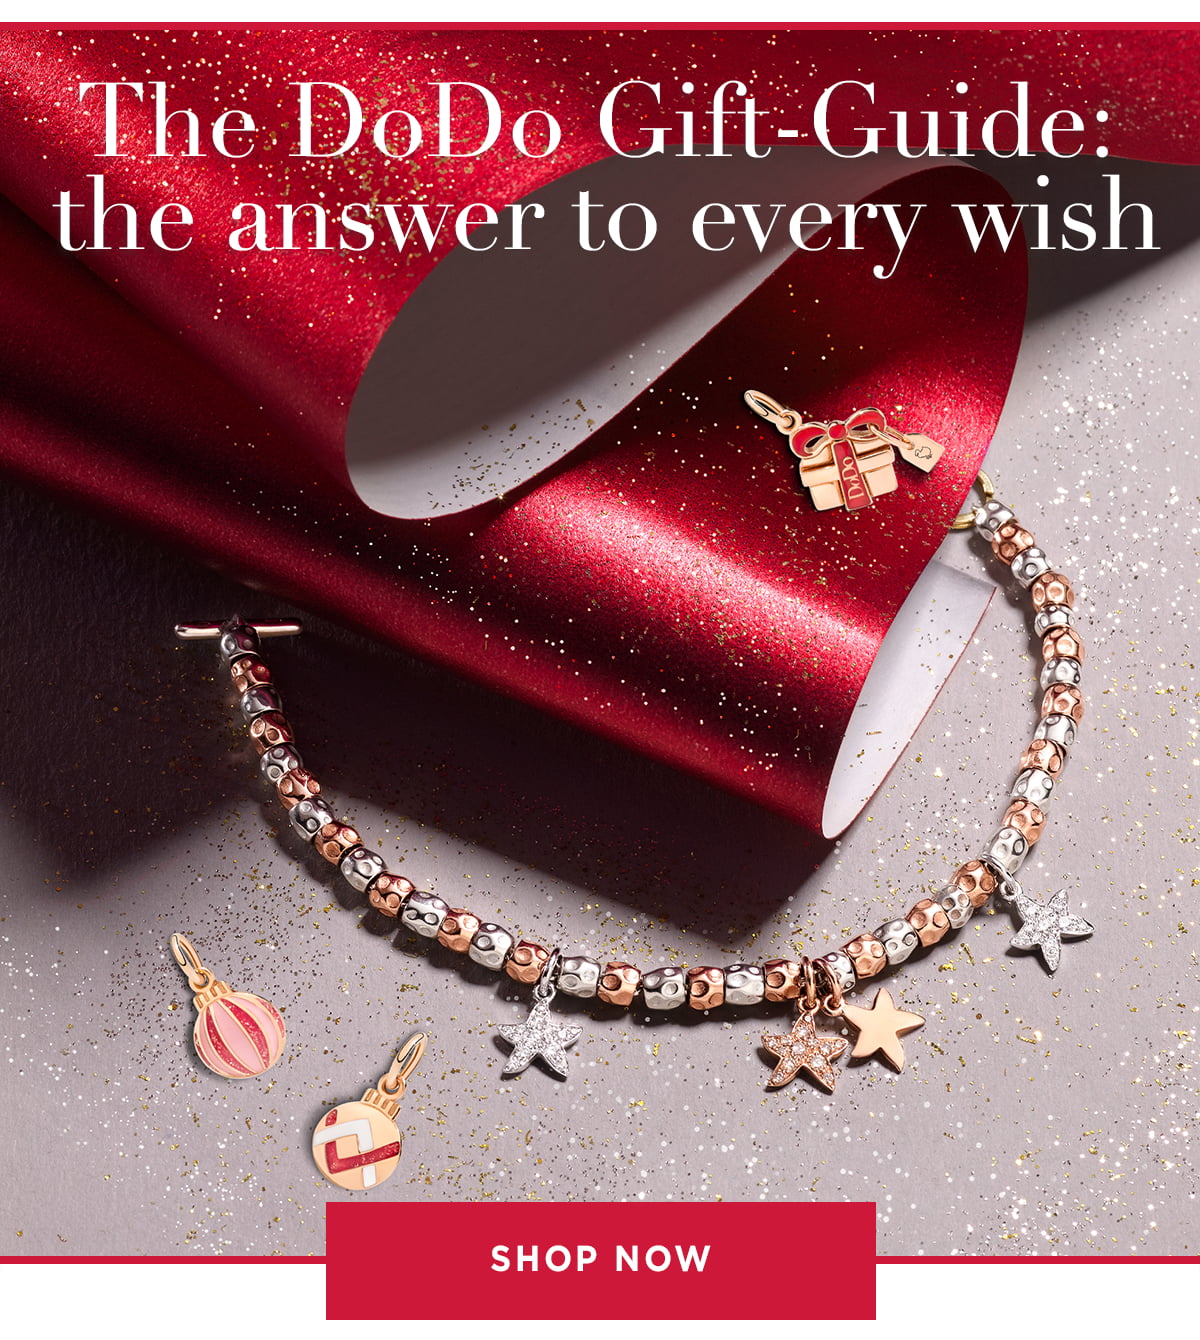 The DoDo Gift-Guide: the answer to every wish